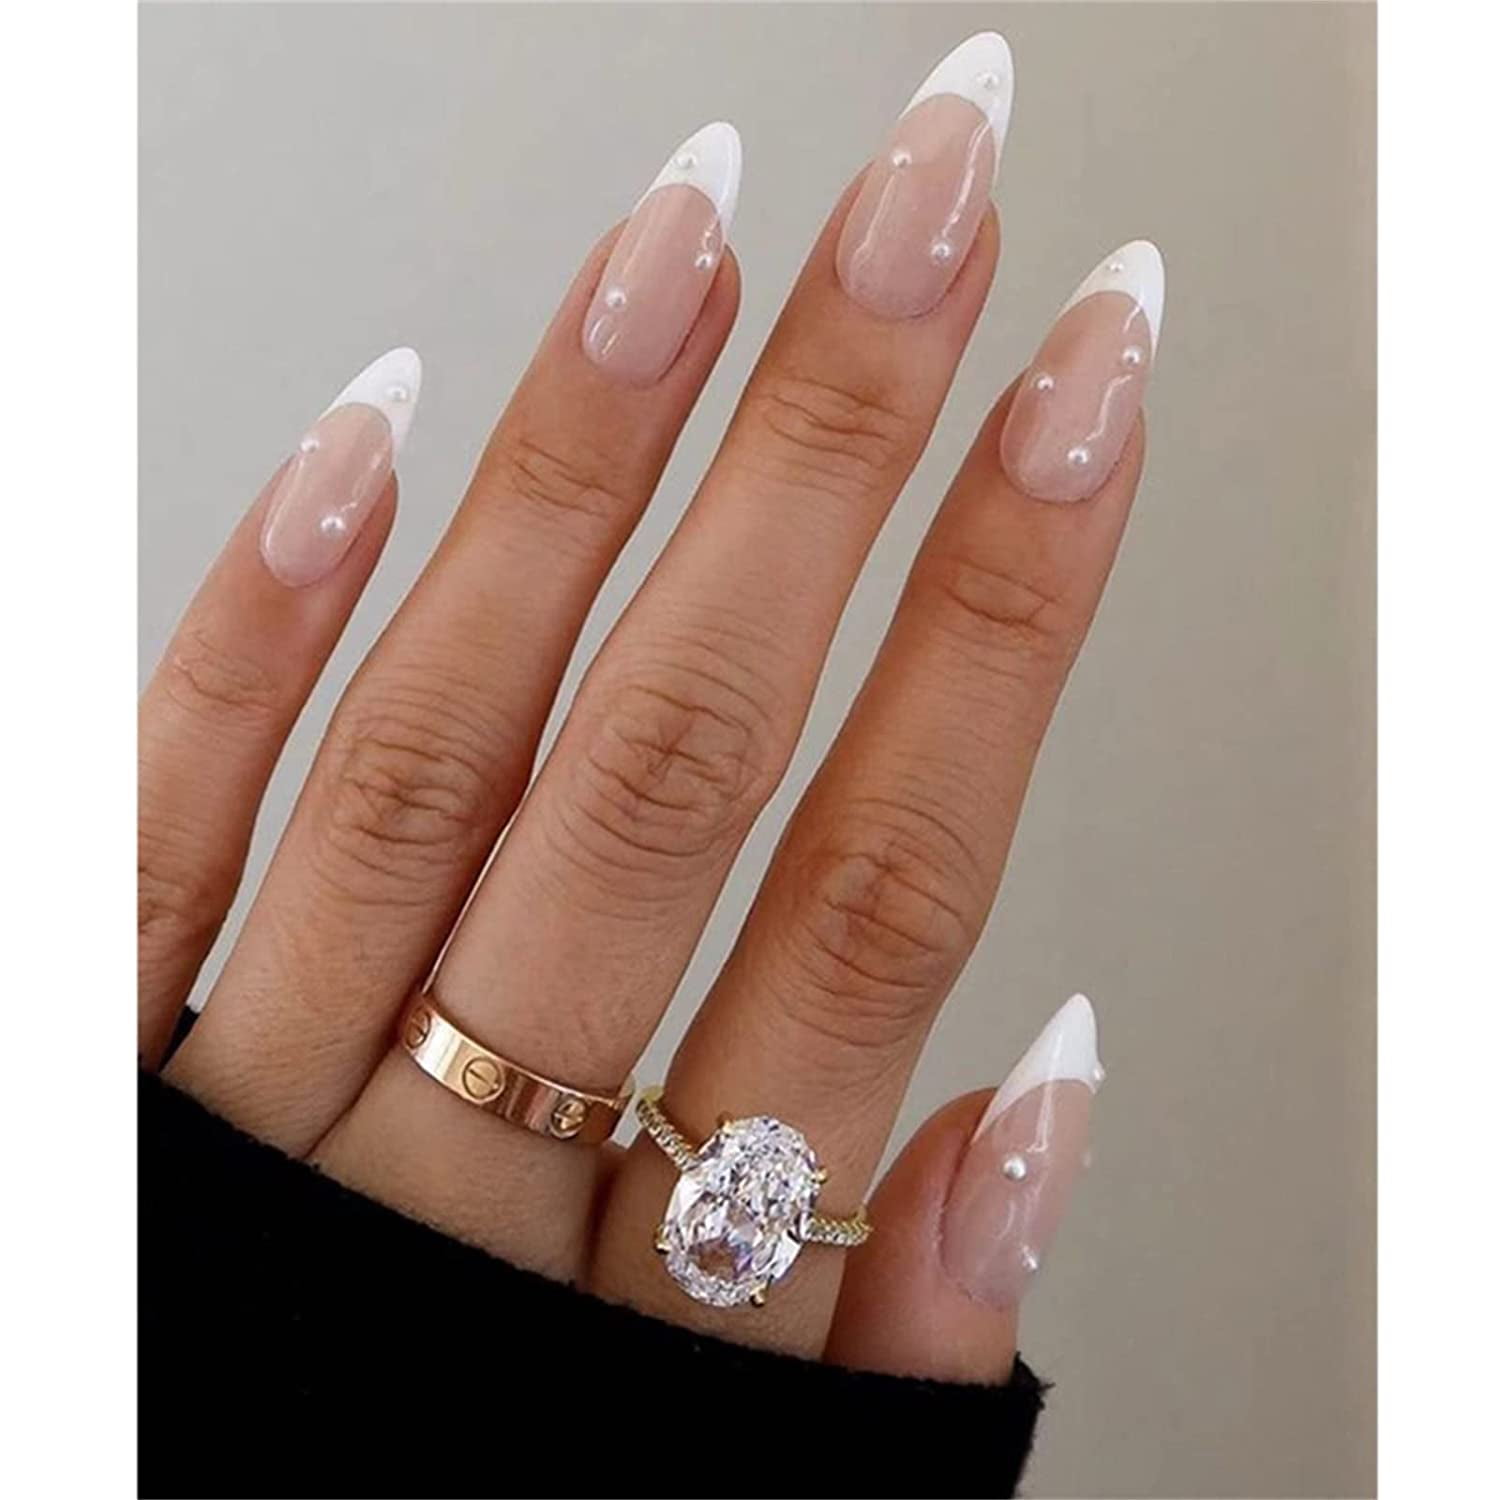 Luxury Ballerina Nail Art Full Stick Ballet Tips With French Phototherapy  Package And Box 20 Candy Boxes From Goodfeeling1dhgate, $1.84 | DHgate.Com